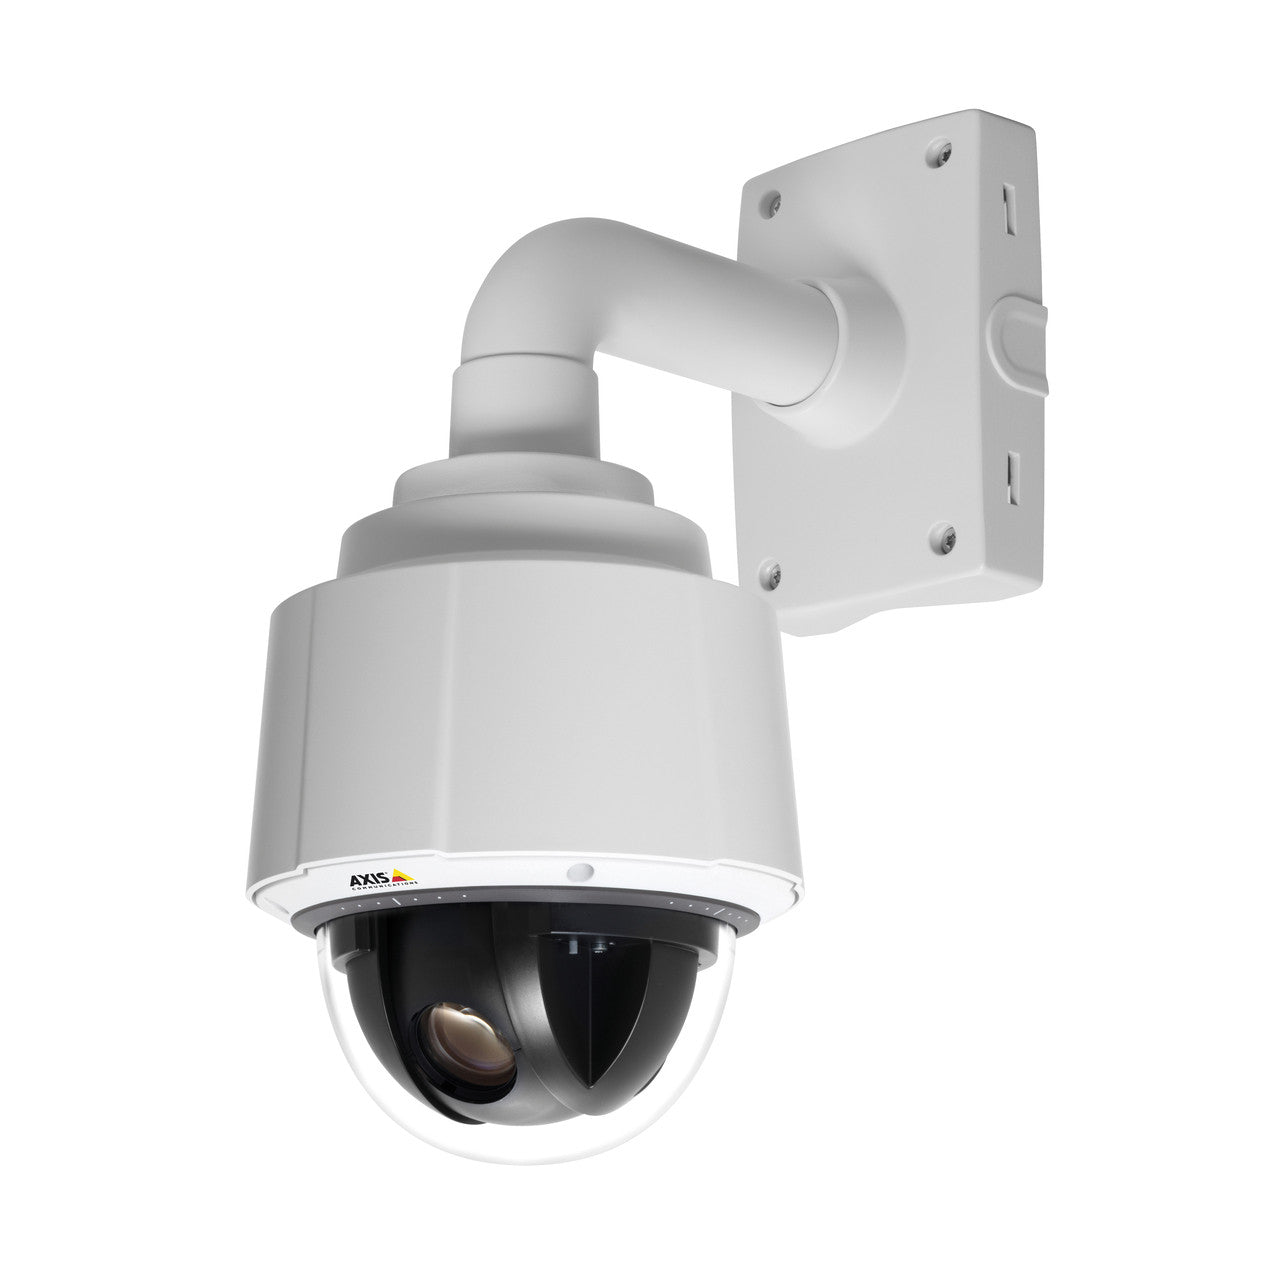 AXIS Q6045 with optional T91A61 Wall Bracket